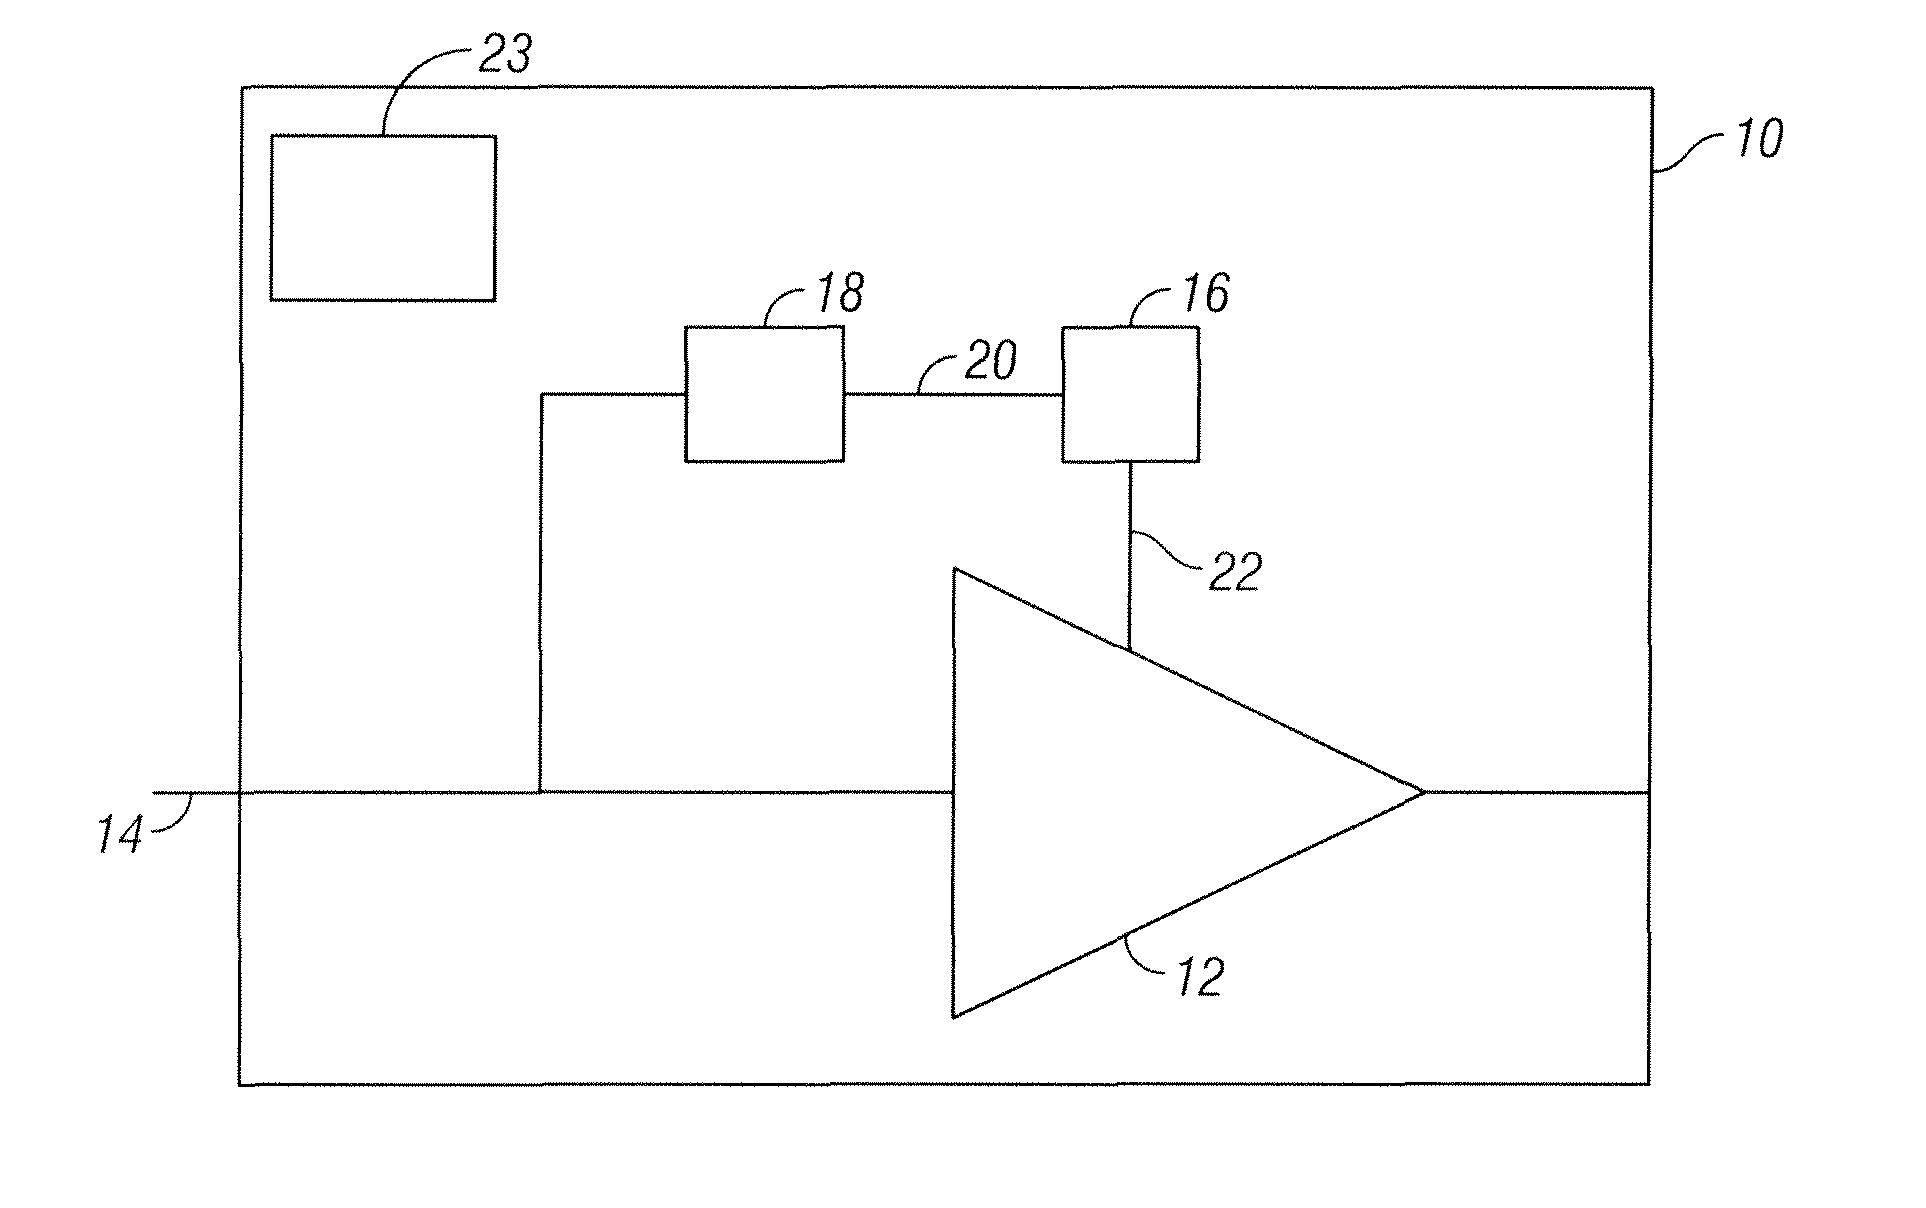 DC-DC conversion for a power amplifier using the RF input